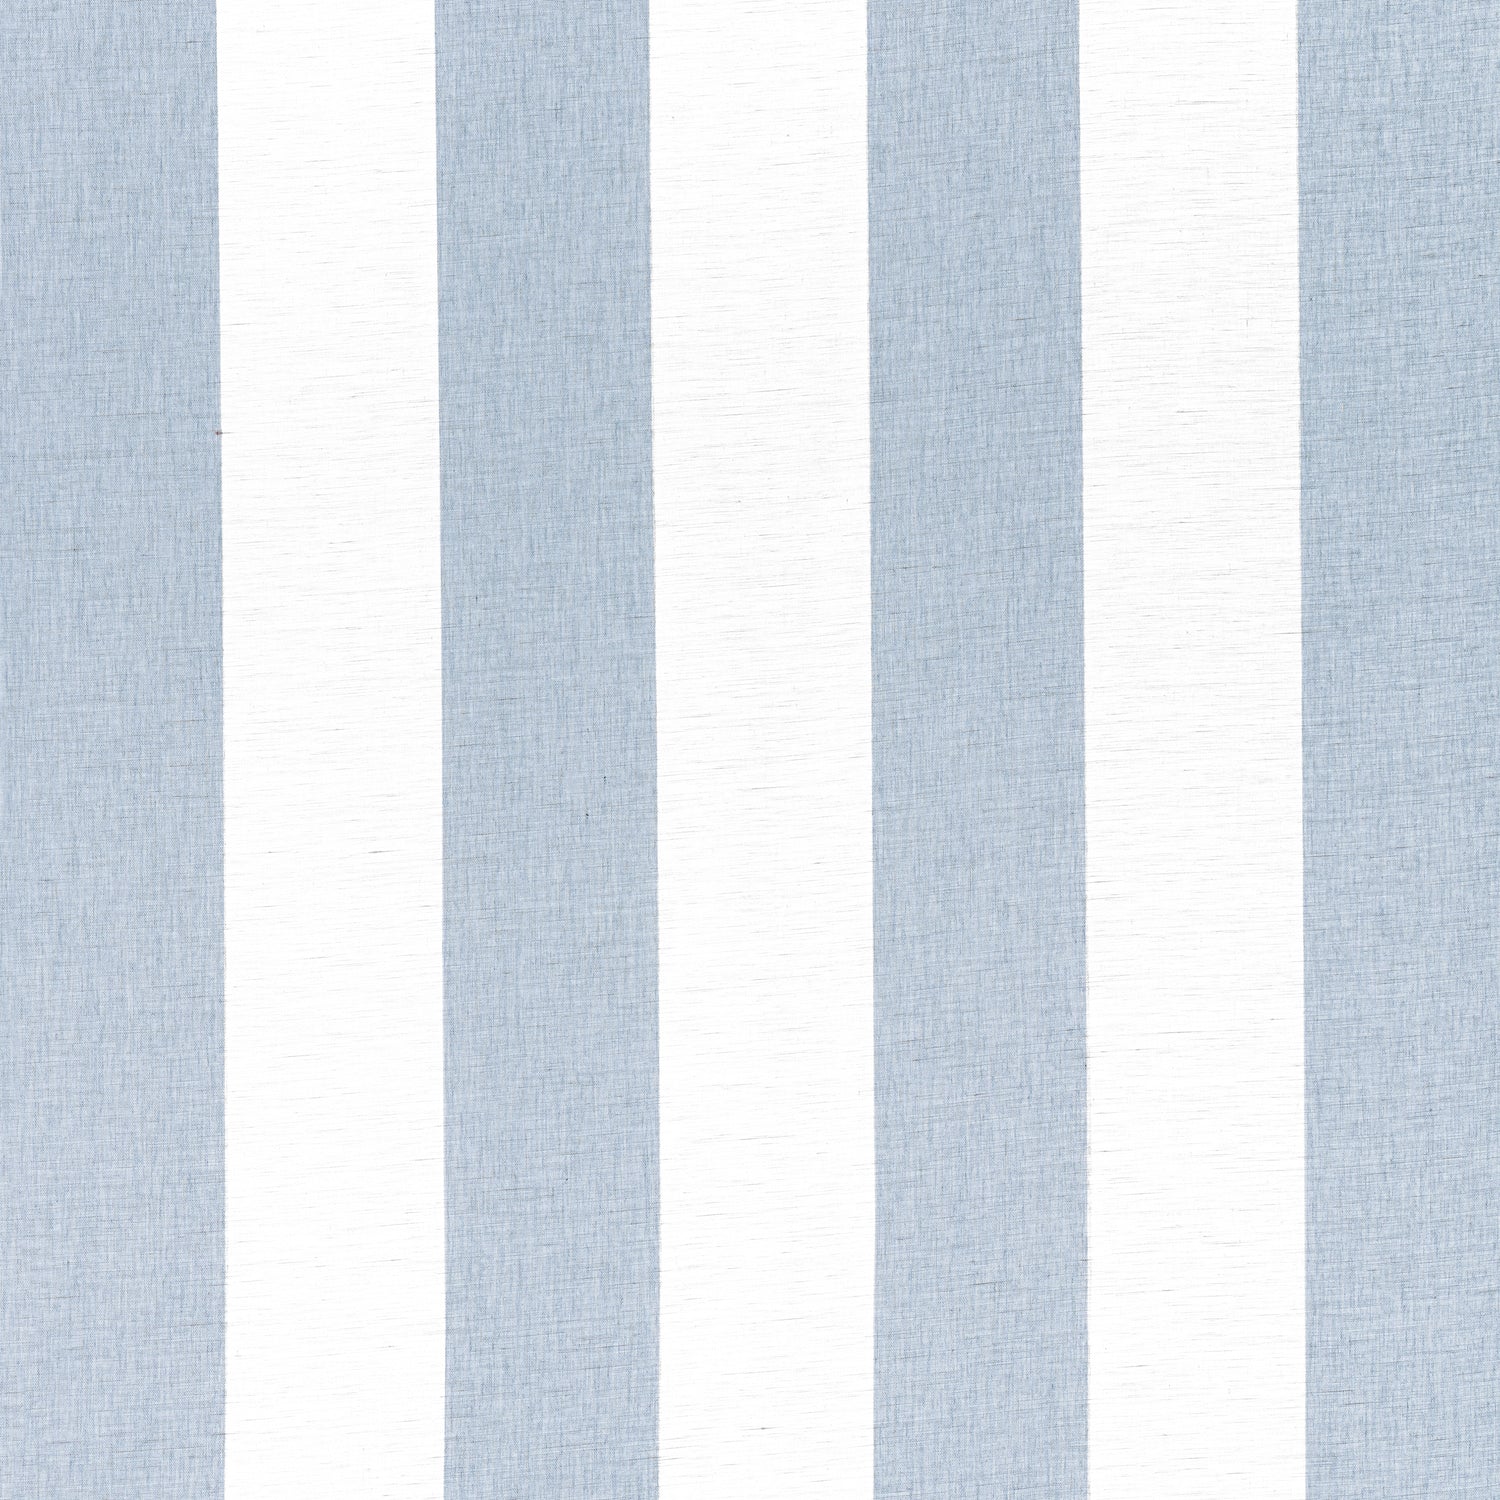 Newport Stripe fabric in navy and white color - pattern number FWW8210 - by Thibaut in the Aura collection